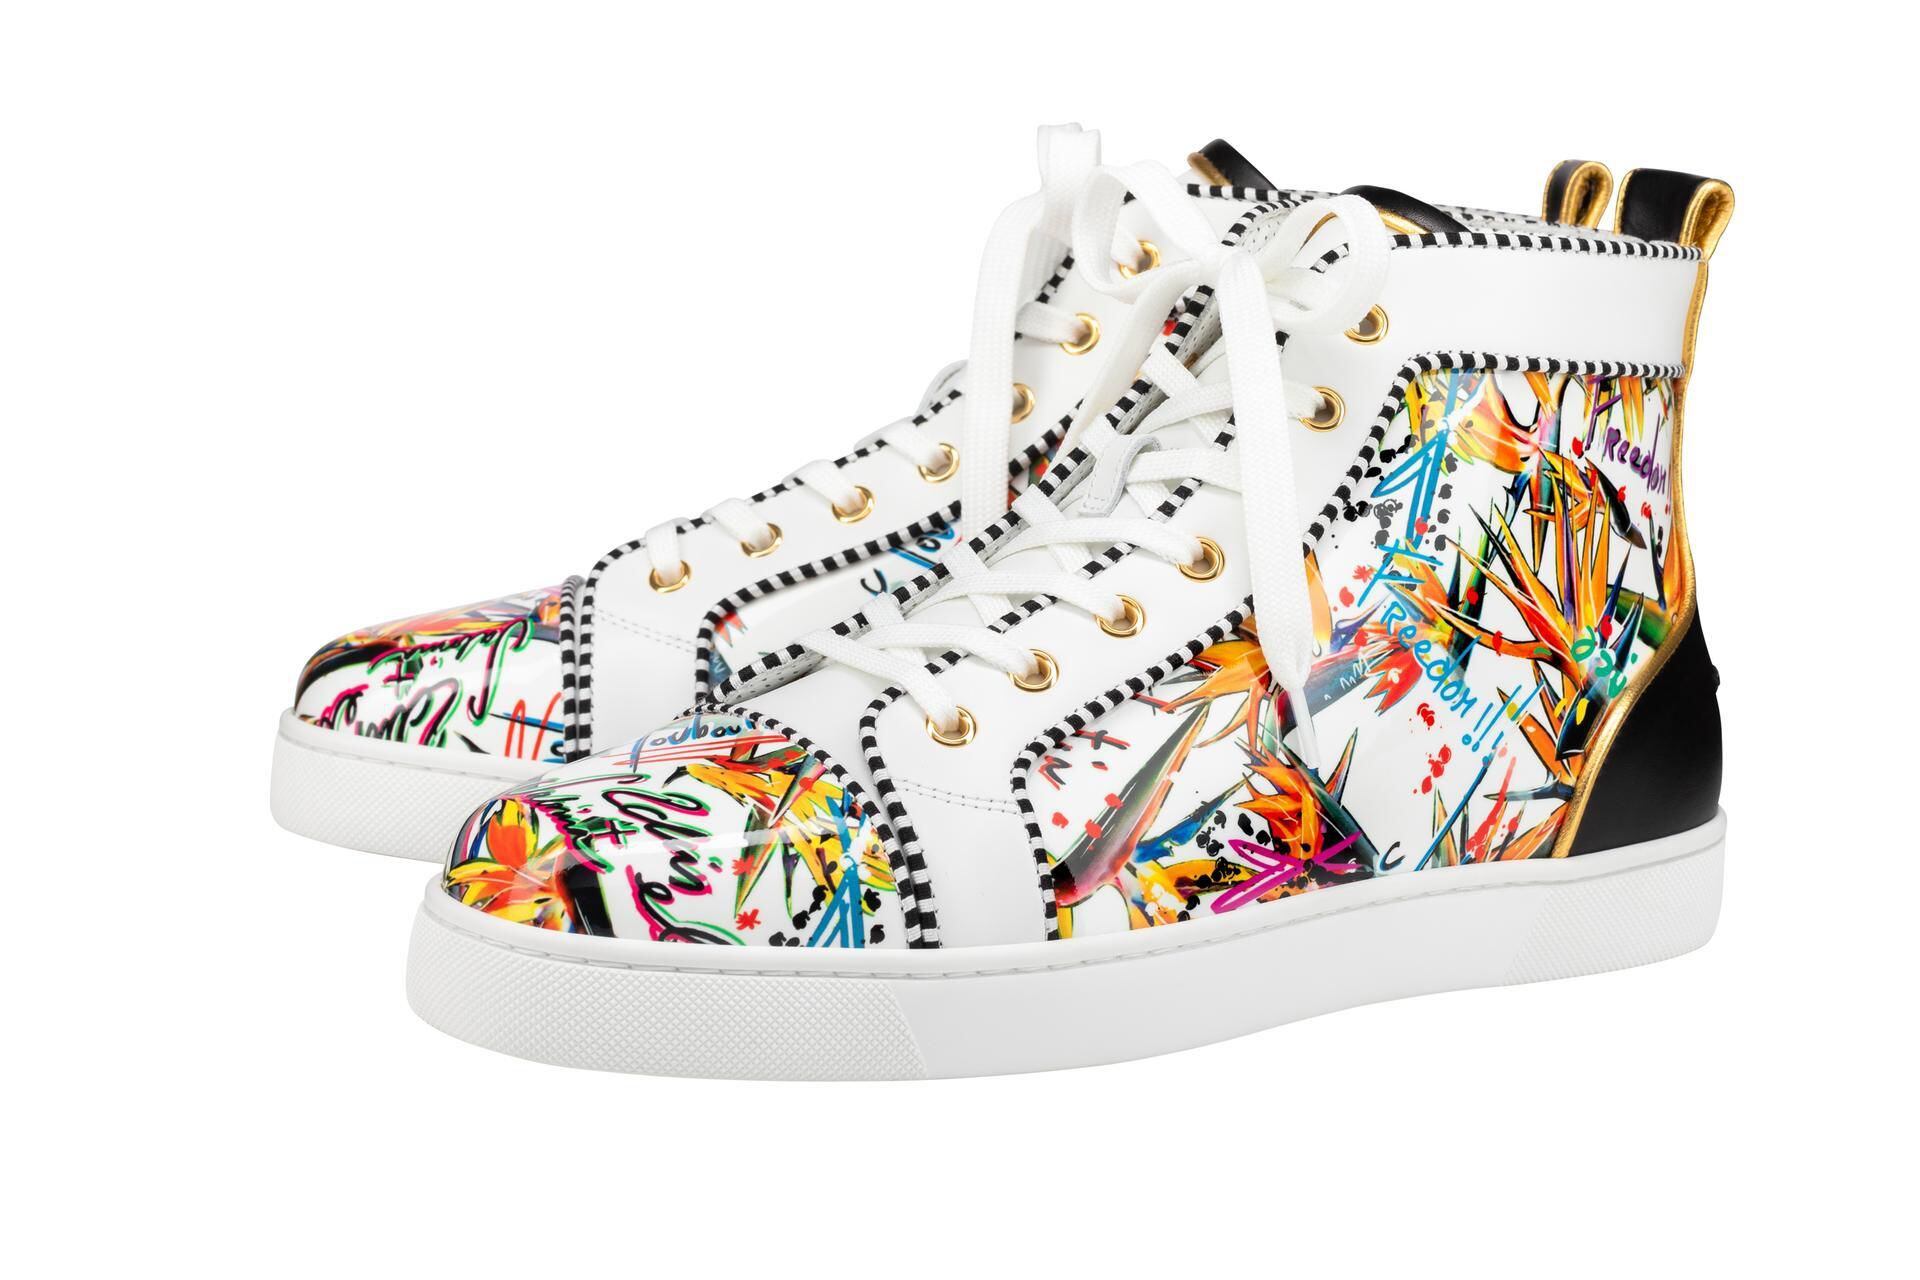 Peep Christian Louboutin's Second Design Collab With The Elbas